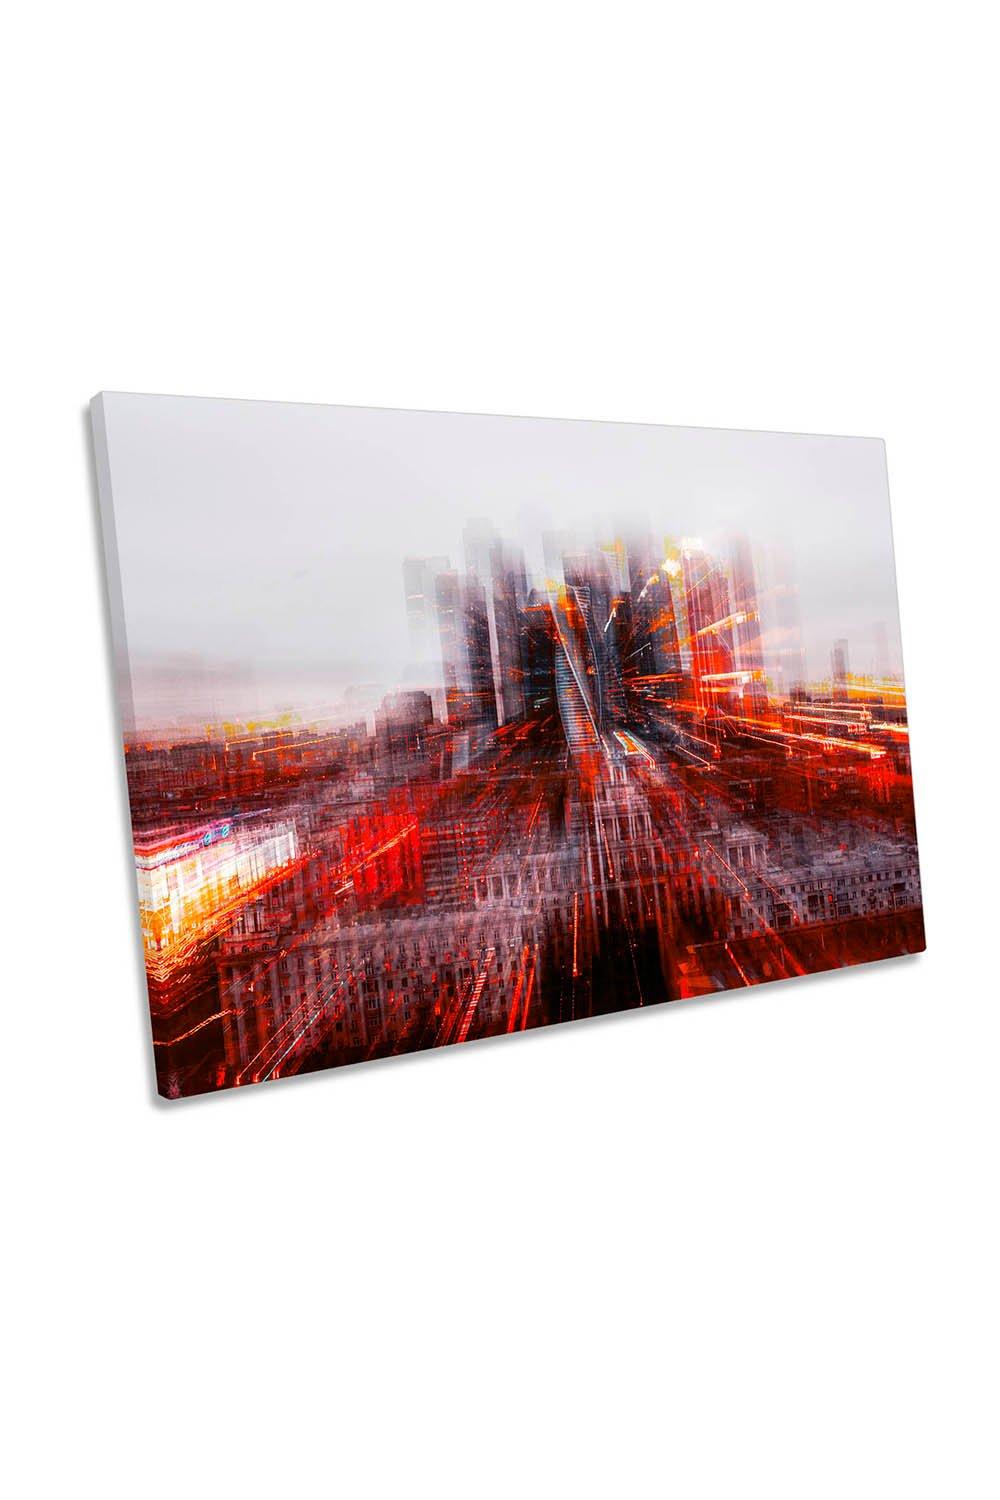 Moscow City Russia Abstract Canvas Wall Art Picture Print